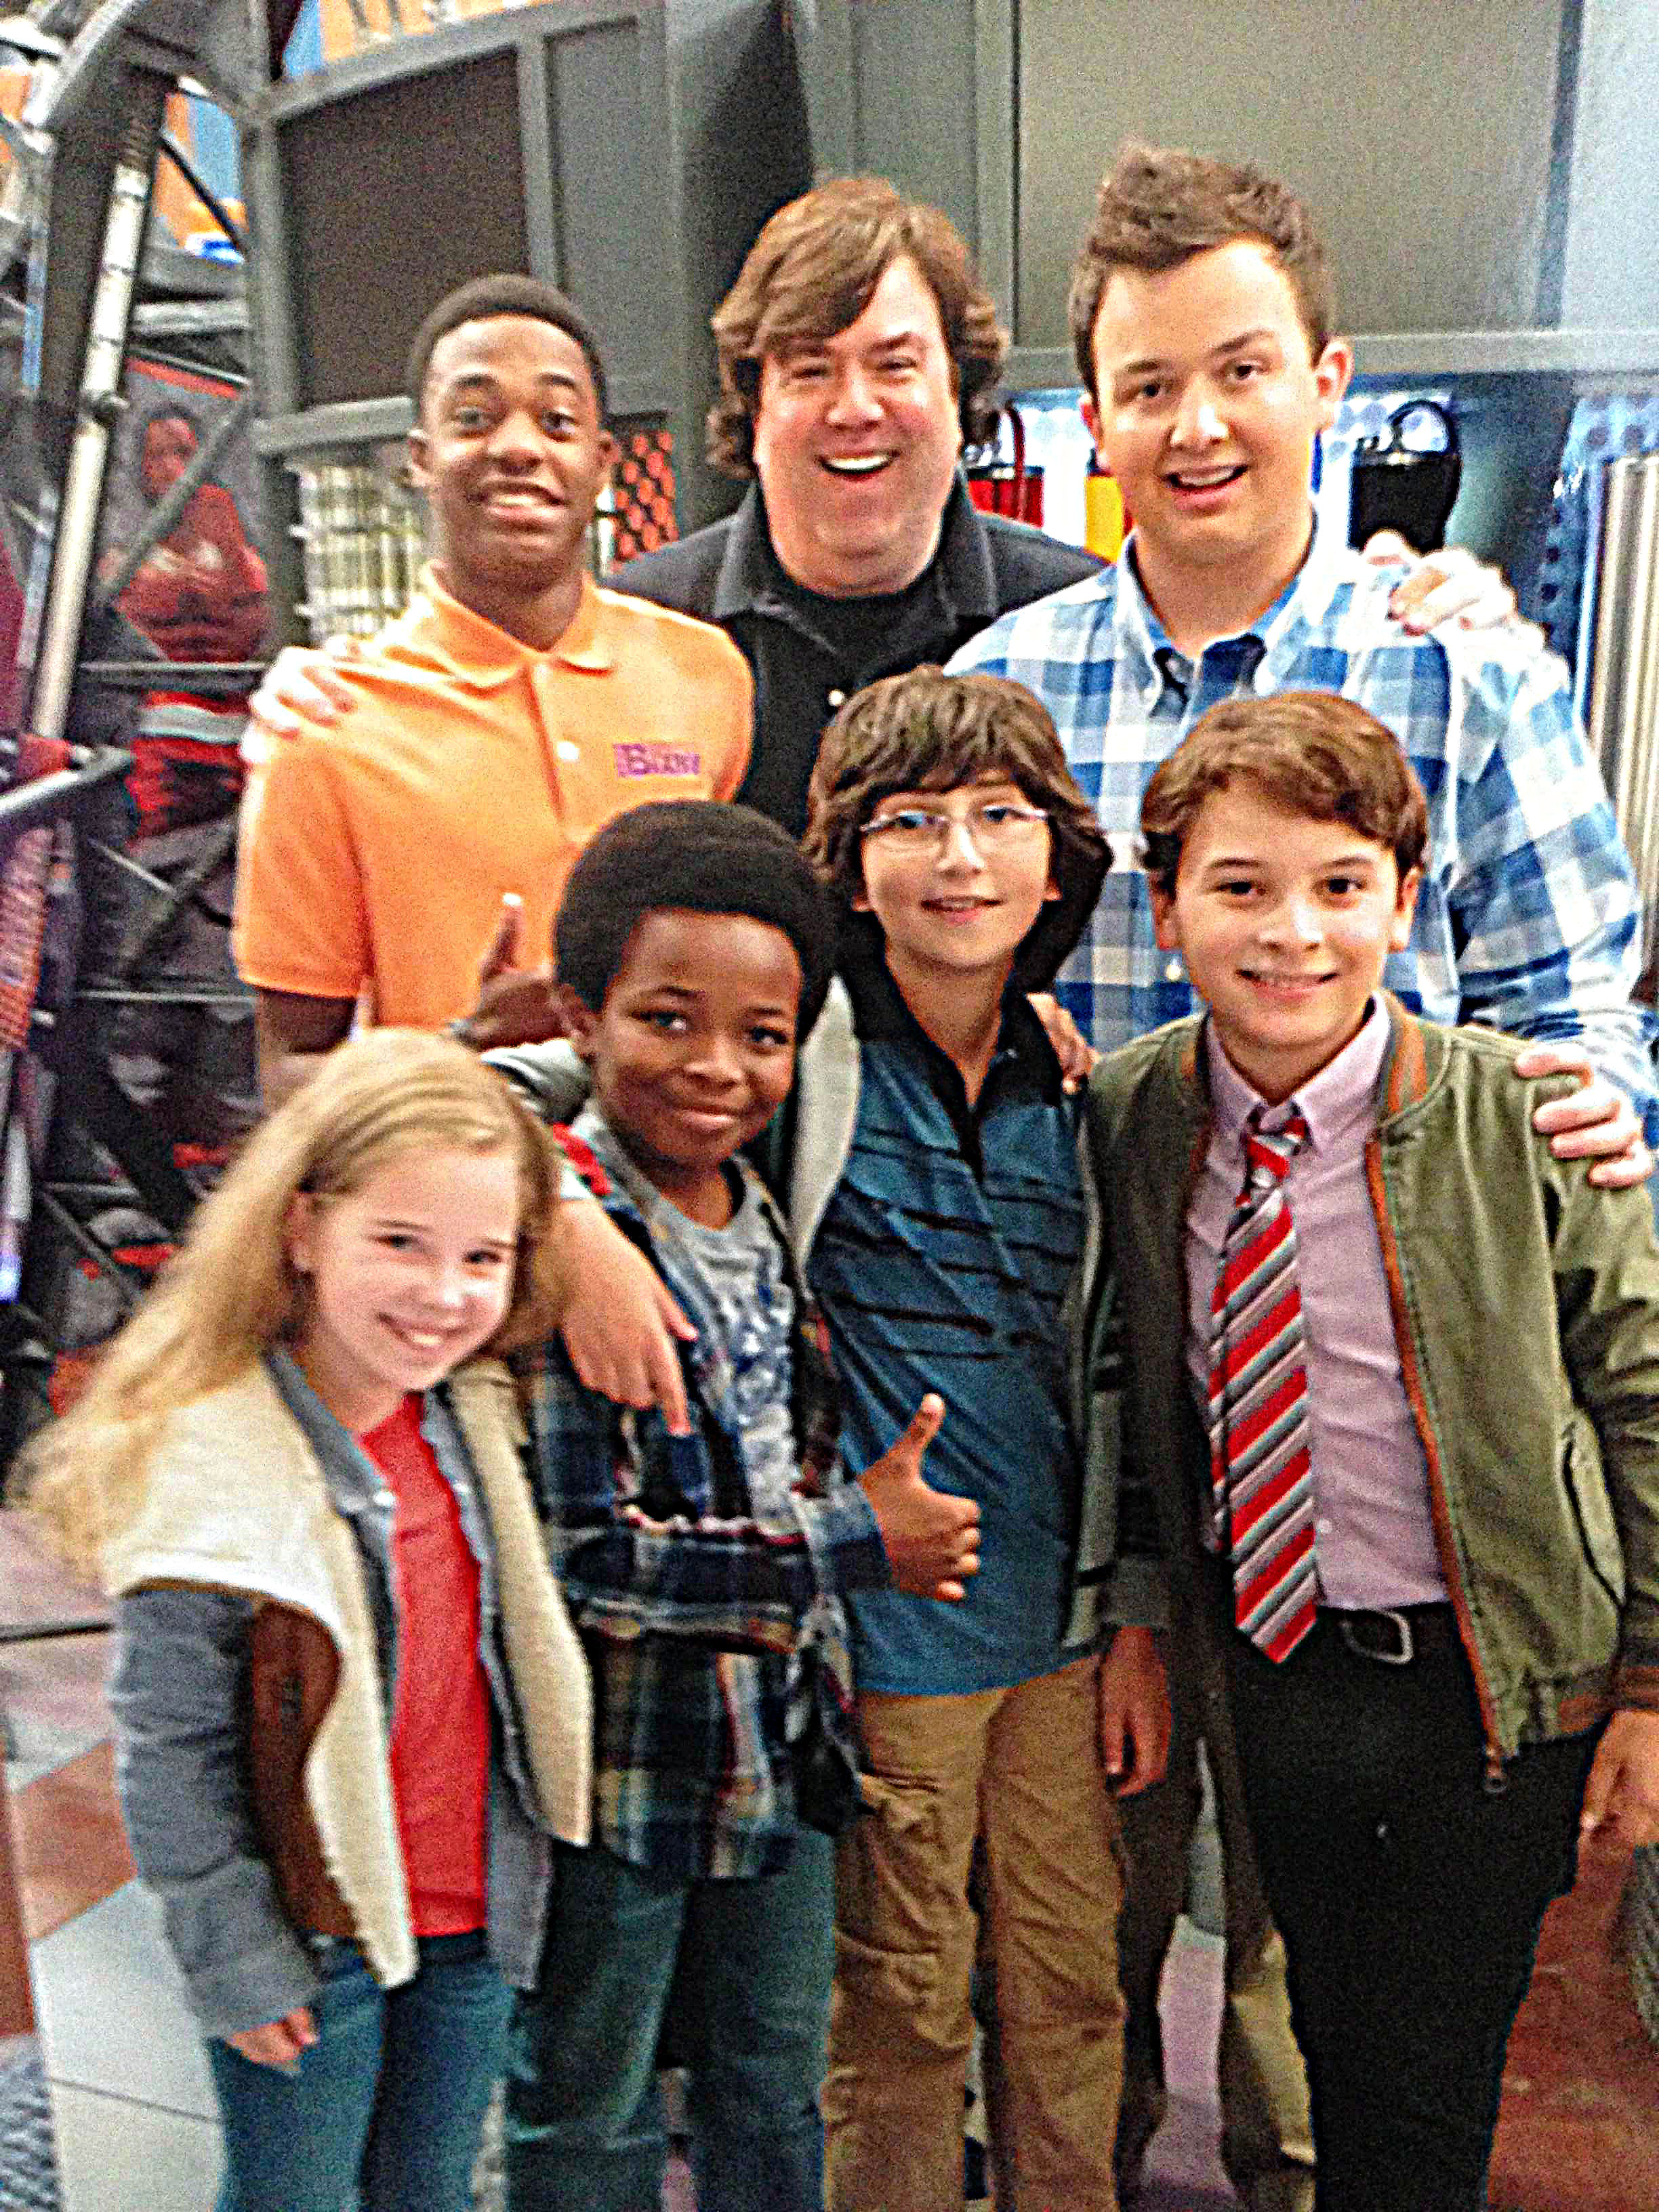 The Cast and Producer, Dan Schneider, of Nickelodeon's pilot, 